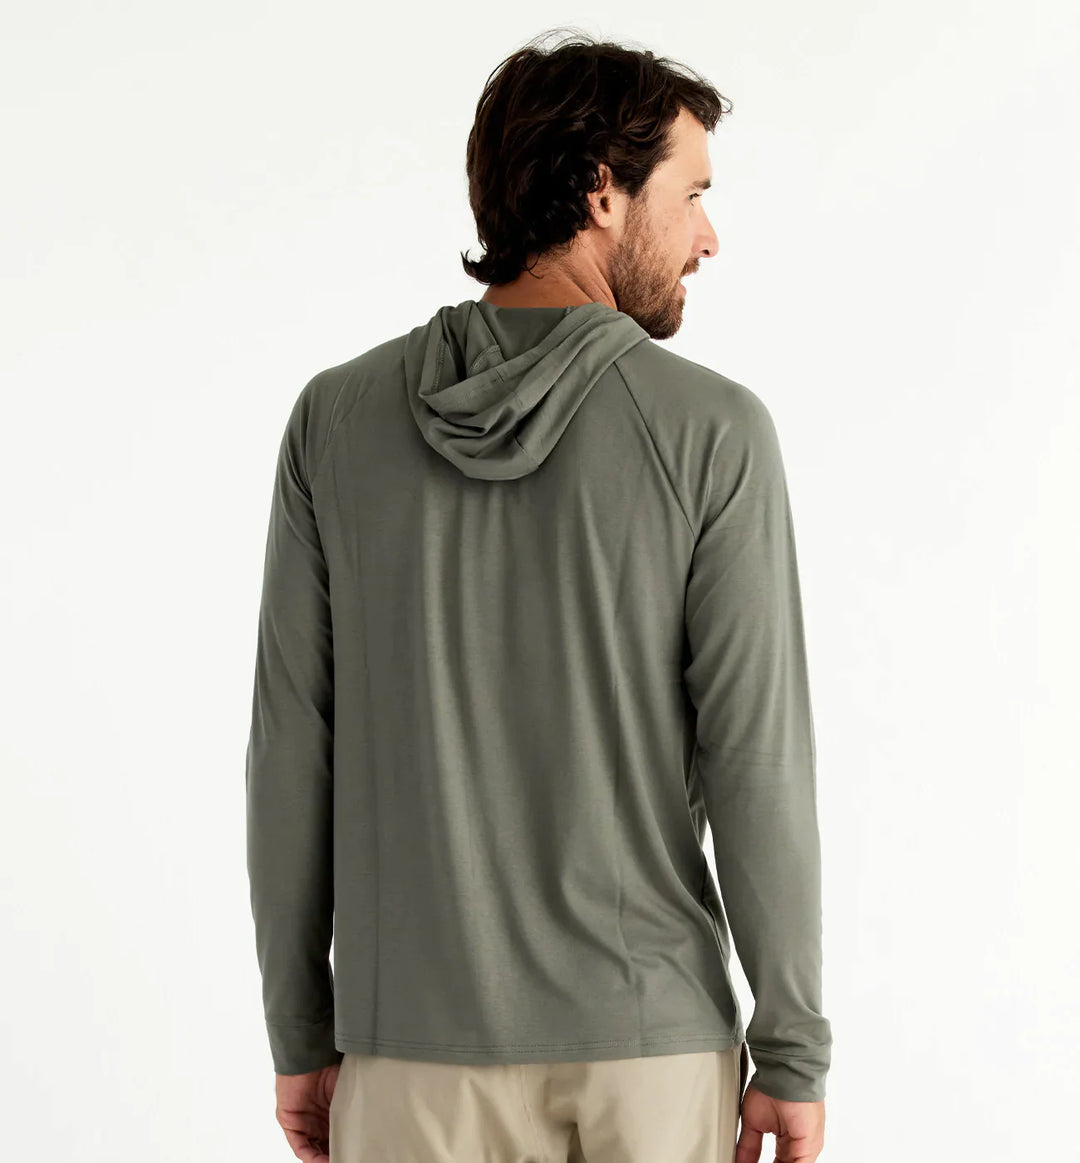 Free Fly Men's Bamboo Flex Hoodie in Fatigue